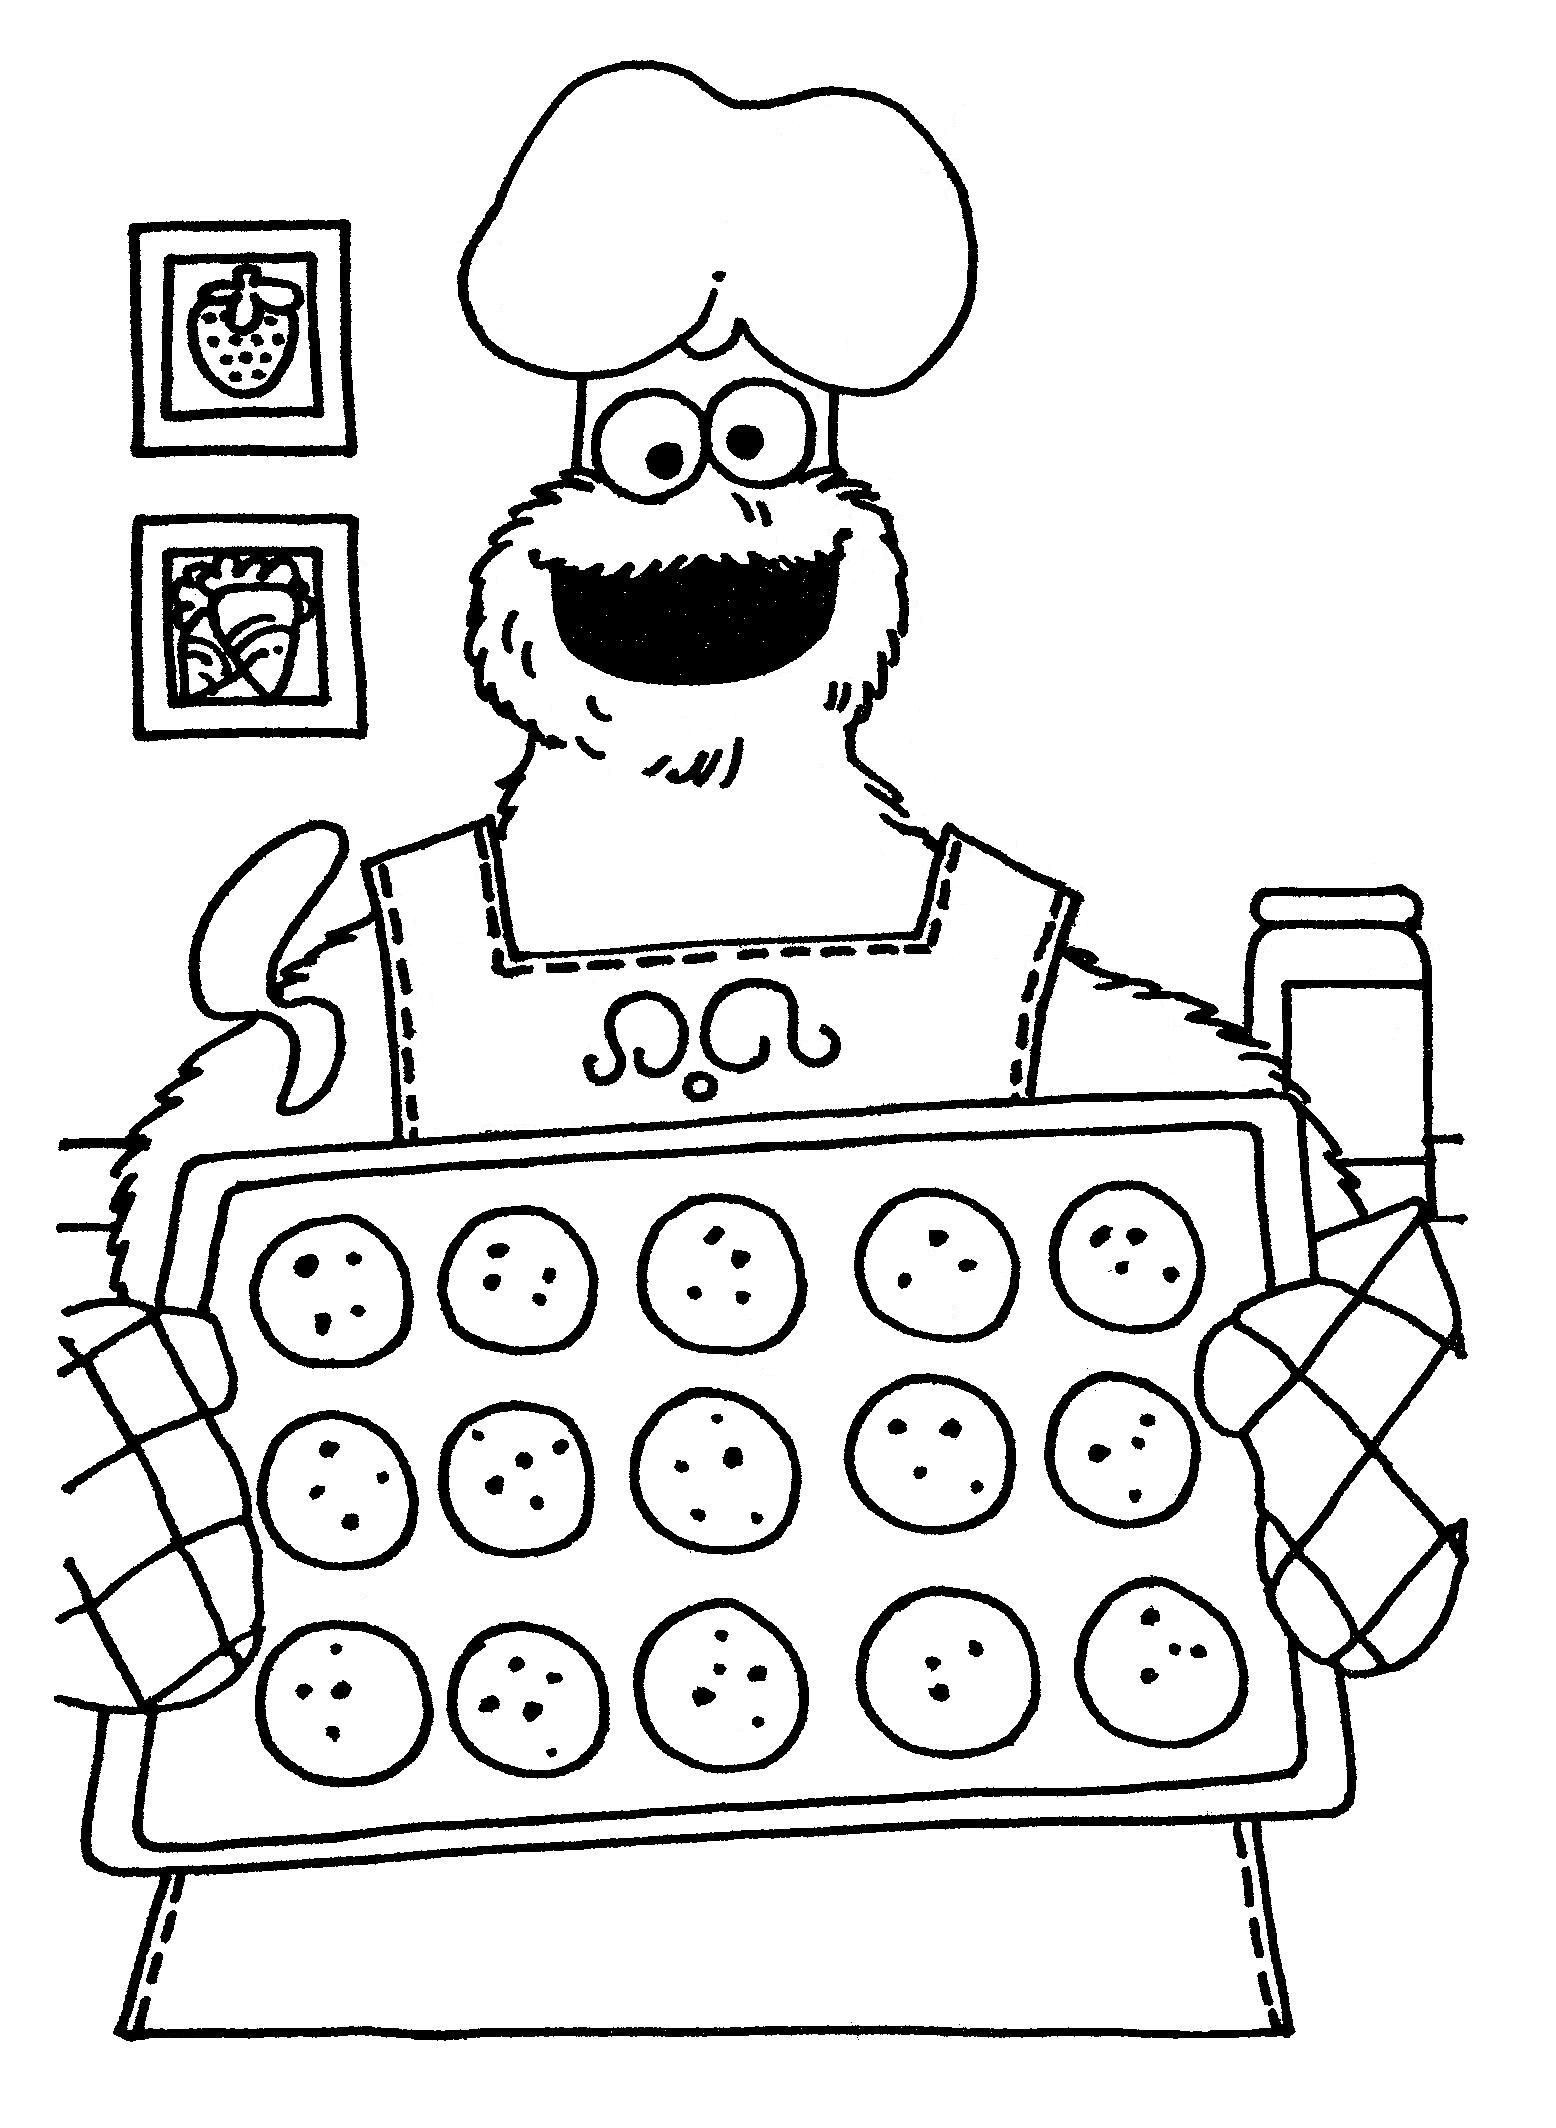 Moshi Monster Coloring Pages Moshi Monsters Coloriages With Cookie Monster Baking Coloring Pages